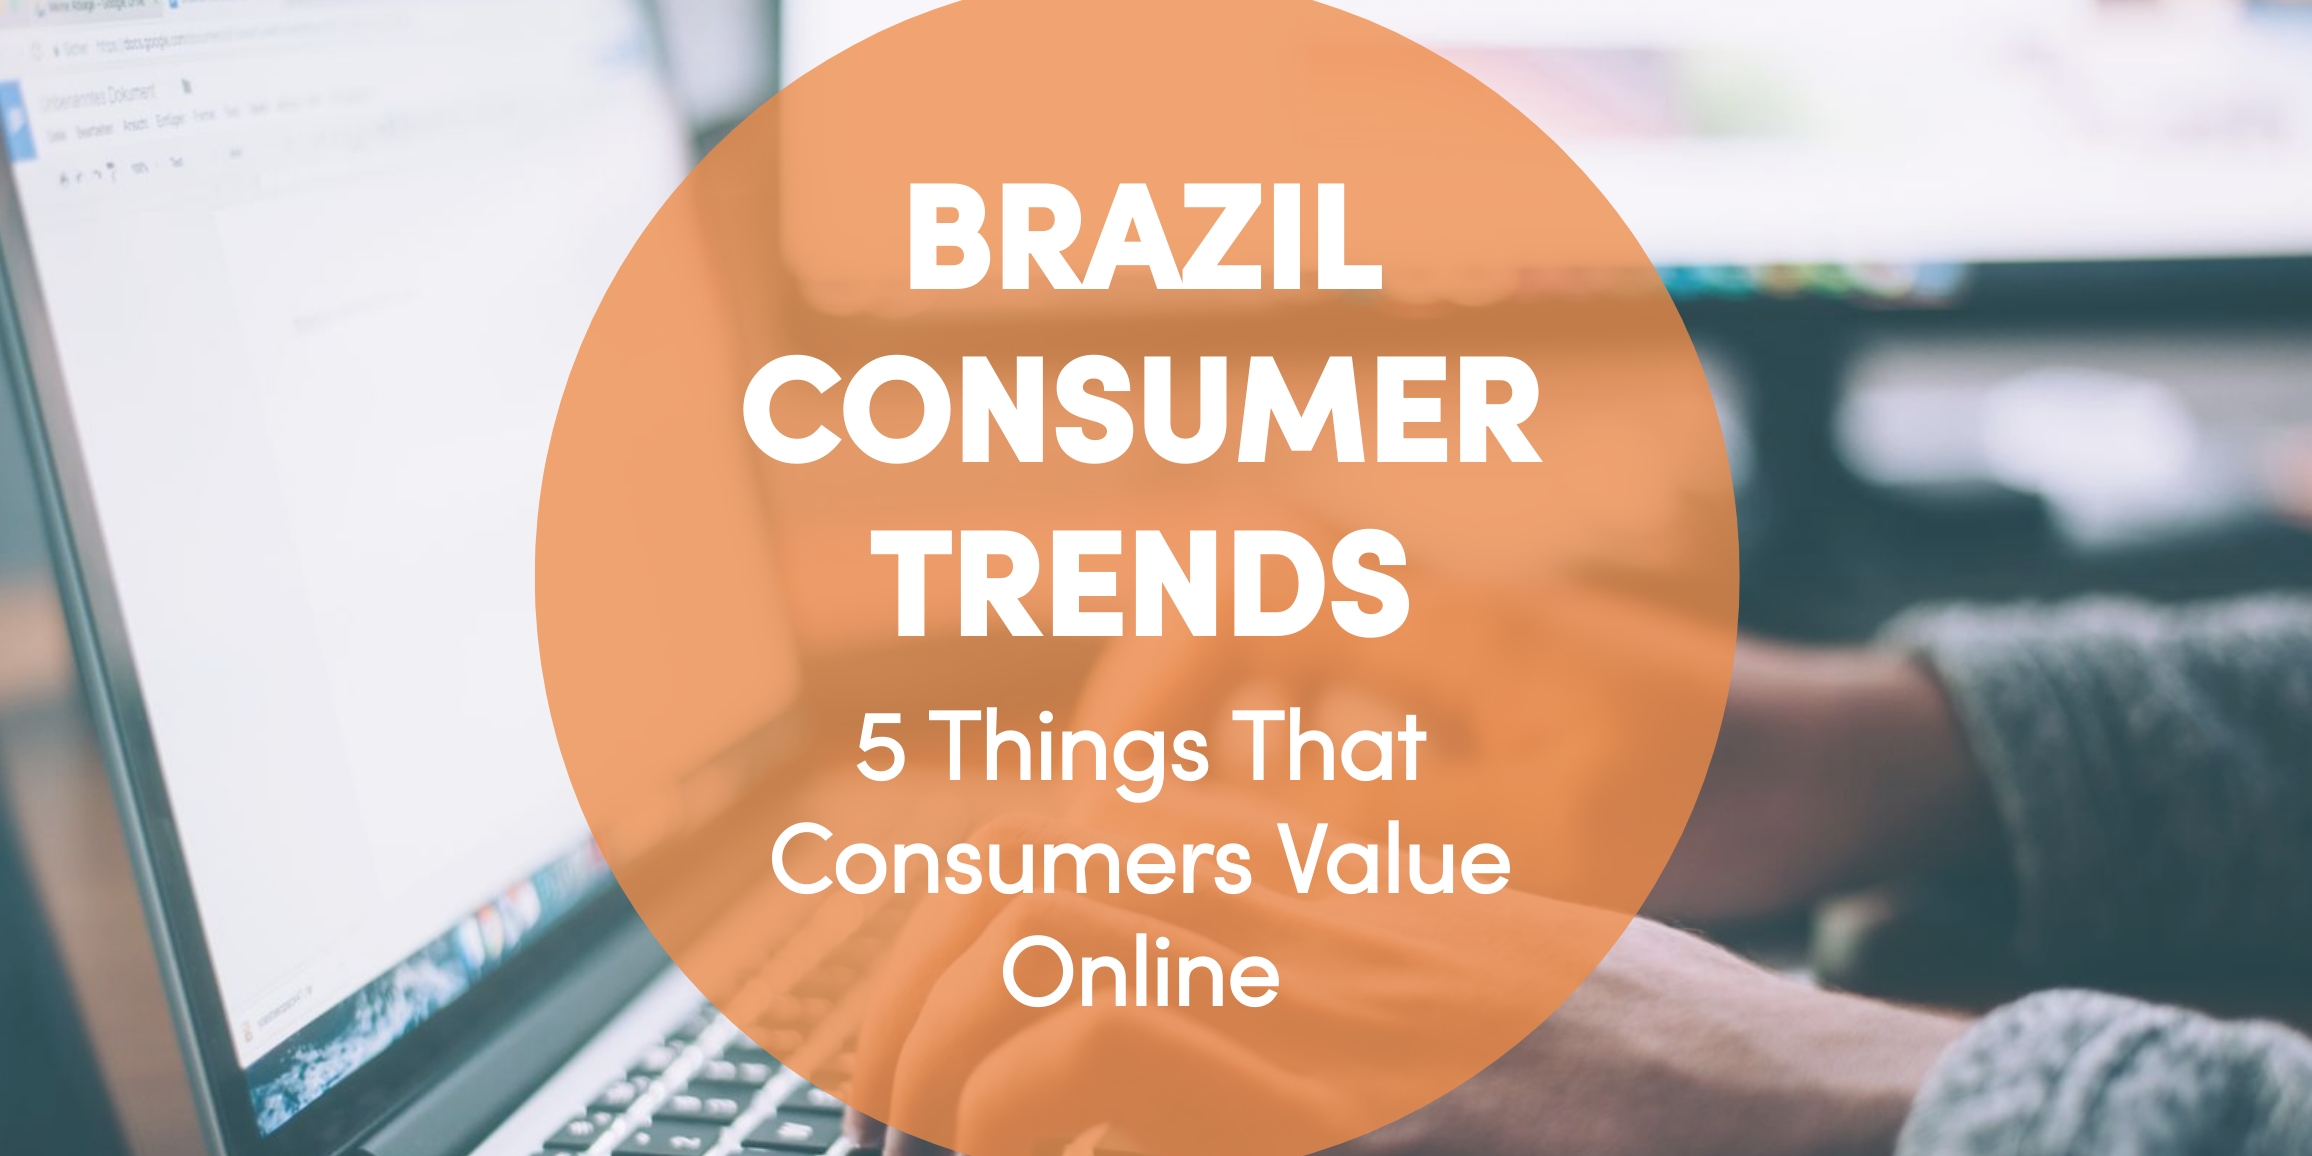 Brazil Consumer Trends 5 Things Valued Online Colibri Content